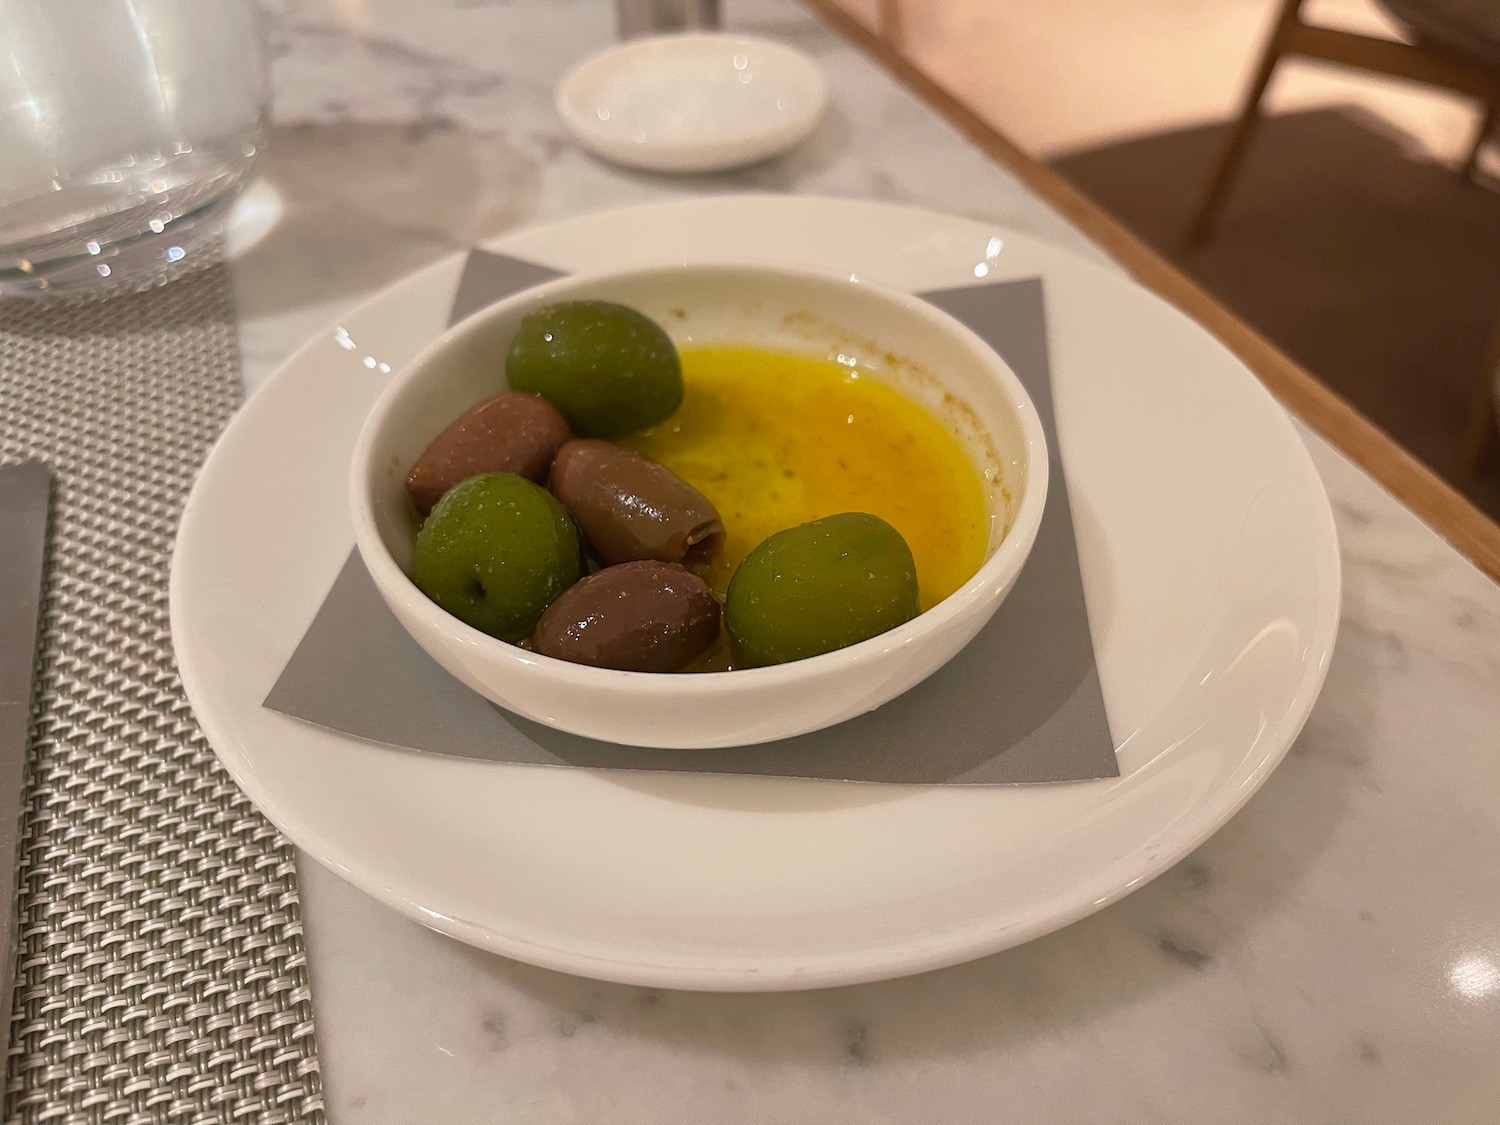 a bowl of olives on a plate